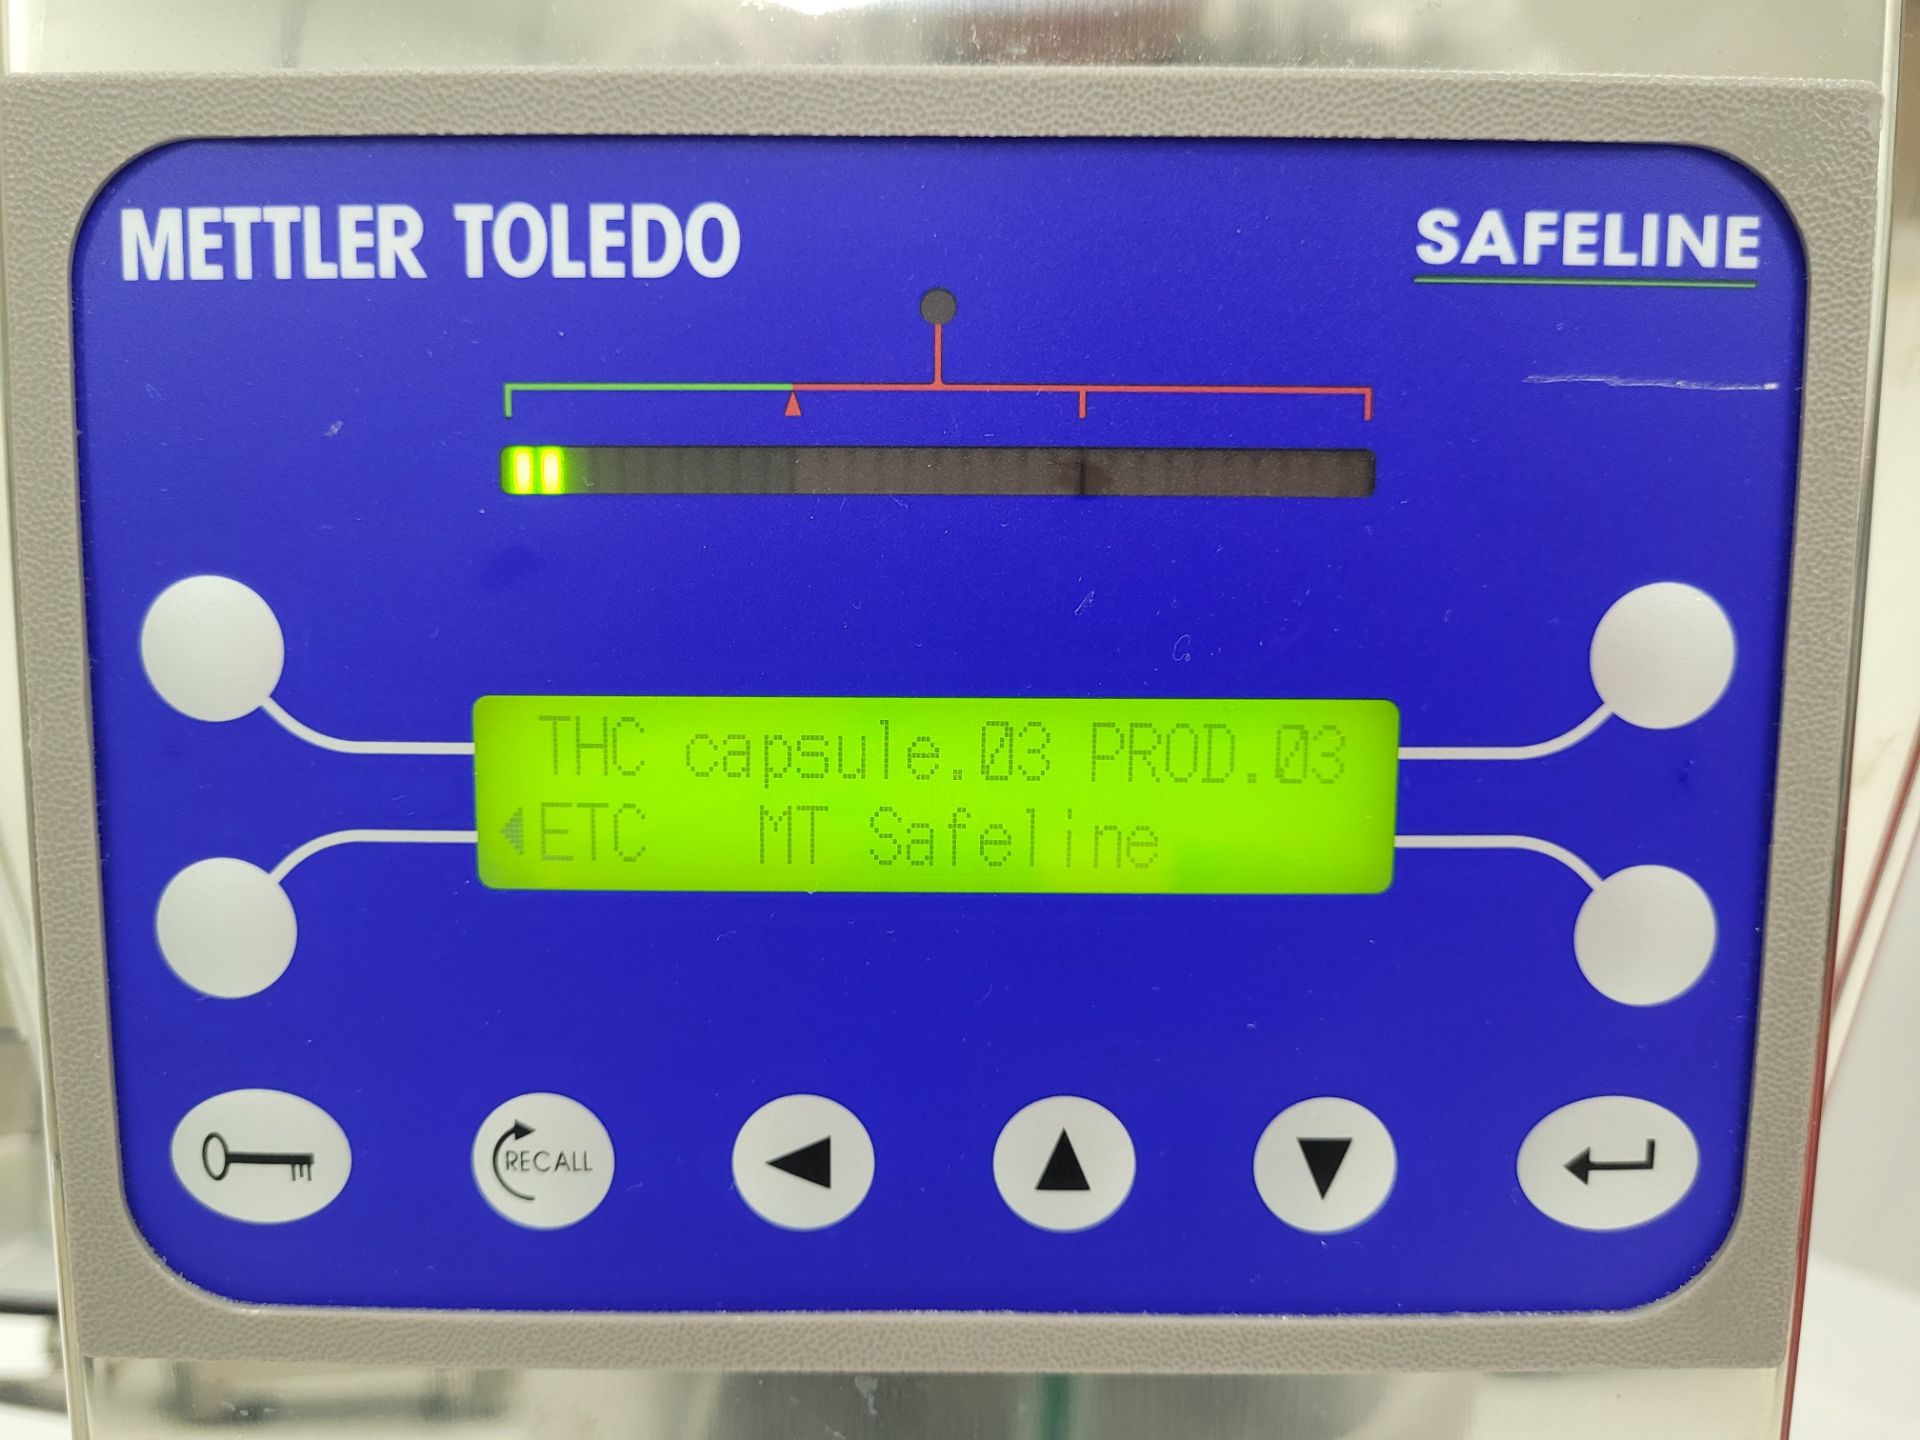 METTLER TOLEDO SAFELINE WEIGHT MEASUREMENT SCALE, S/N: 301087 - LOCATED IN ROOM 23 (SUBJECT TO BULKD - Image 5 of 10